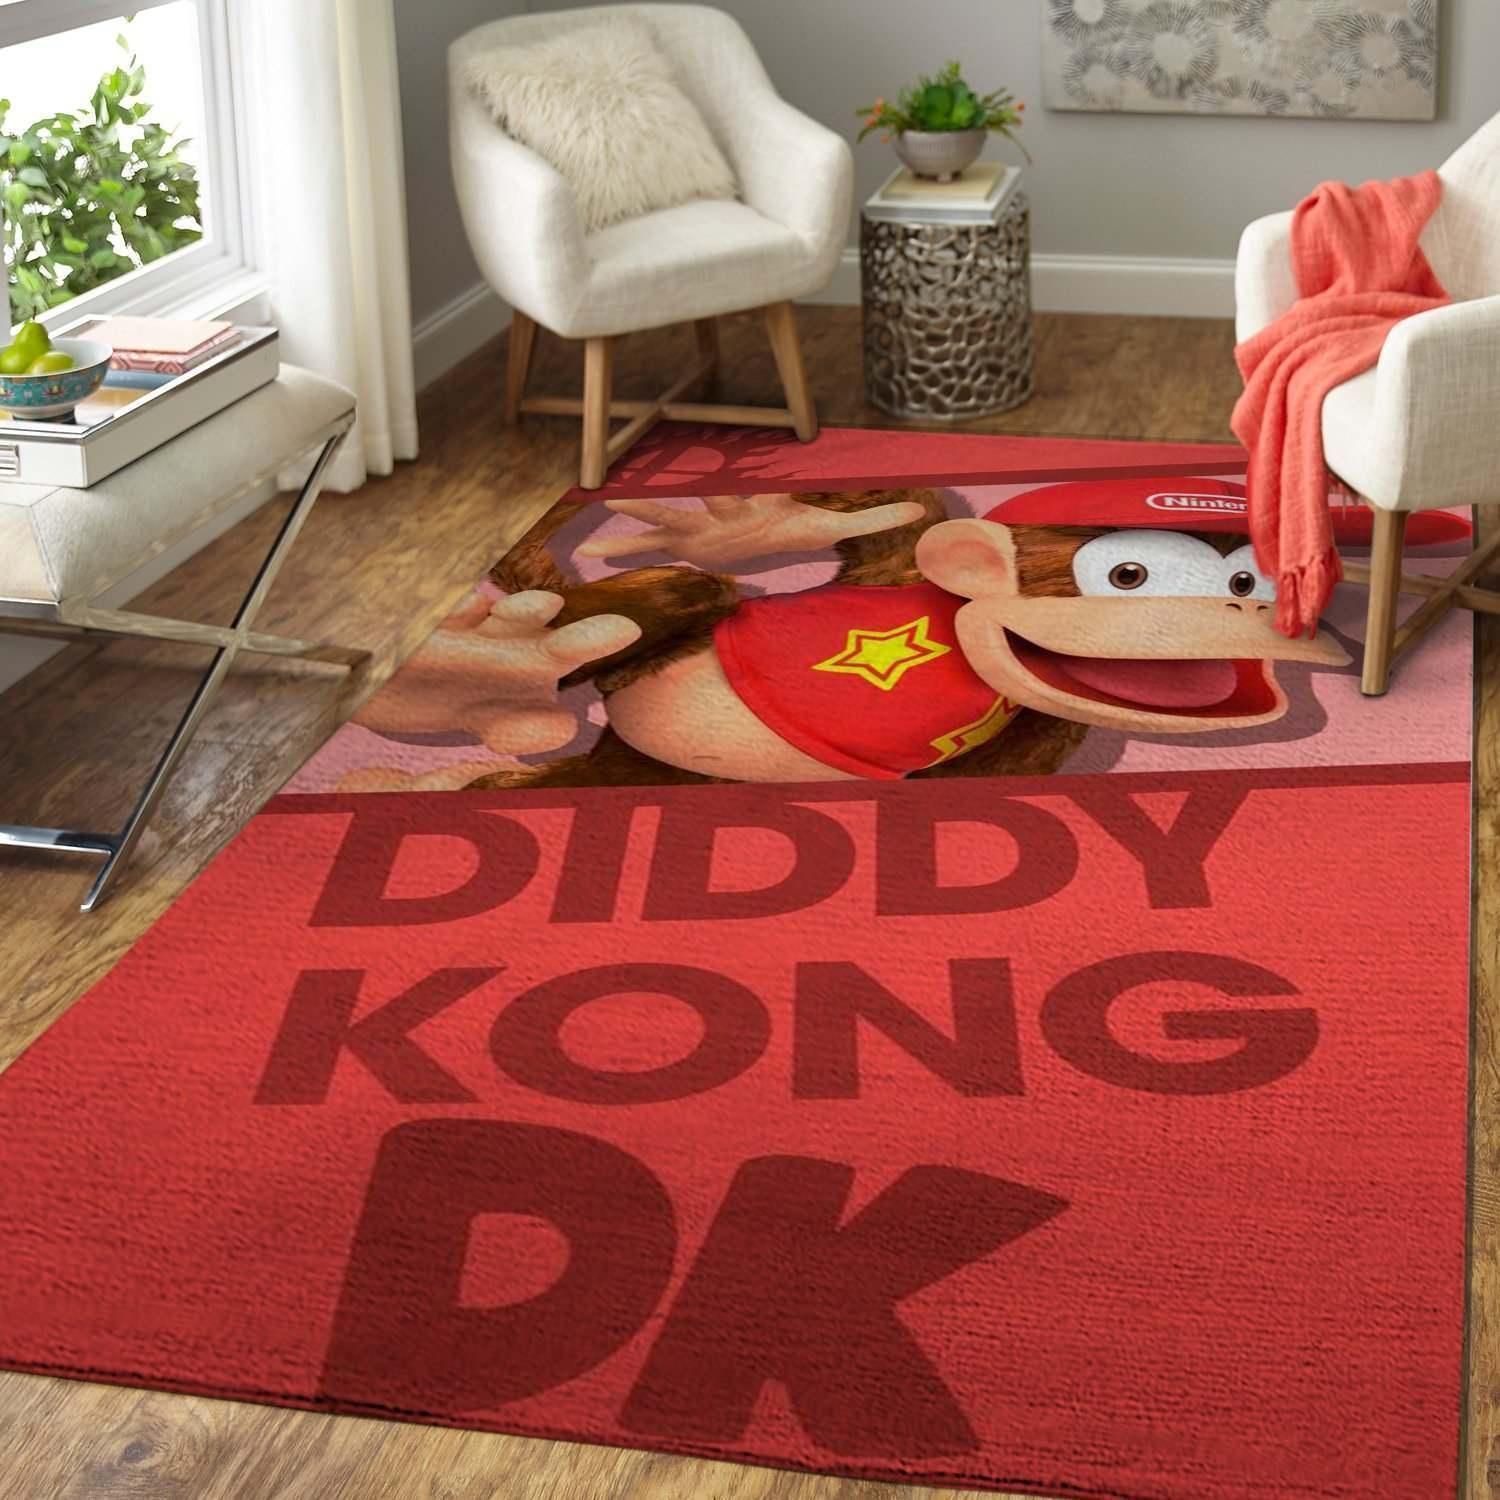 video game fans diggy kong teppich gaming home decor homebeautyus 1303